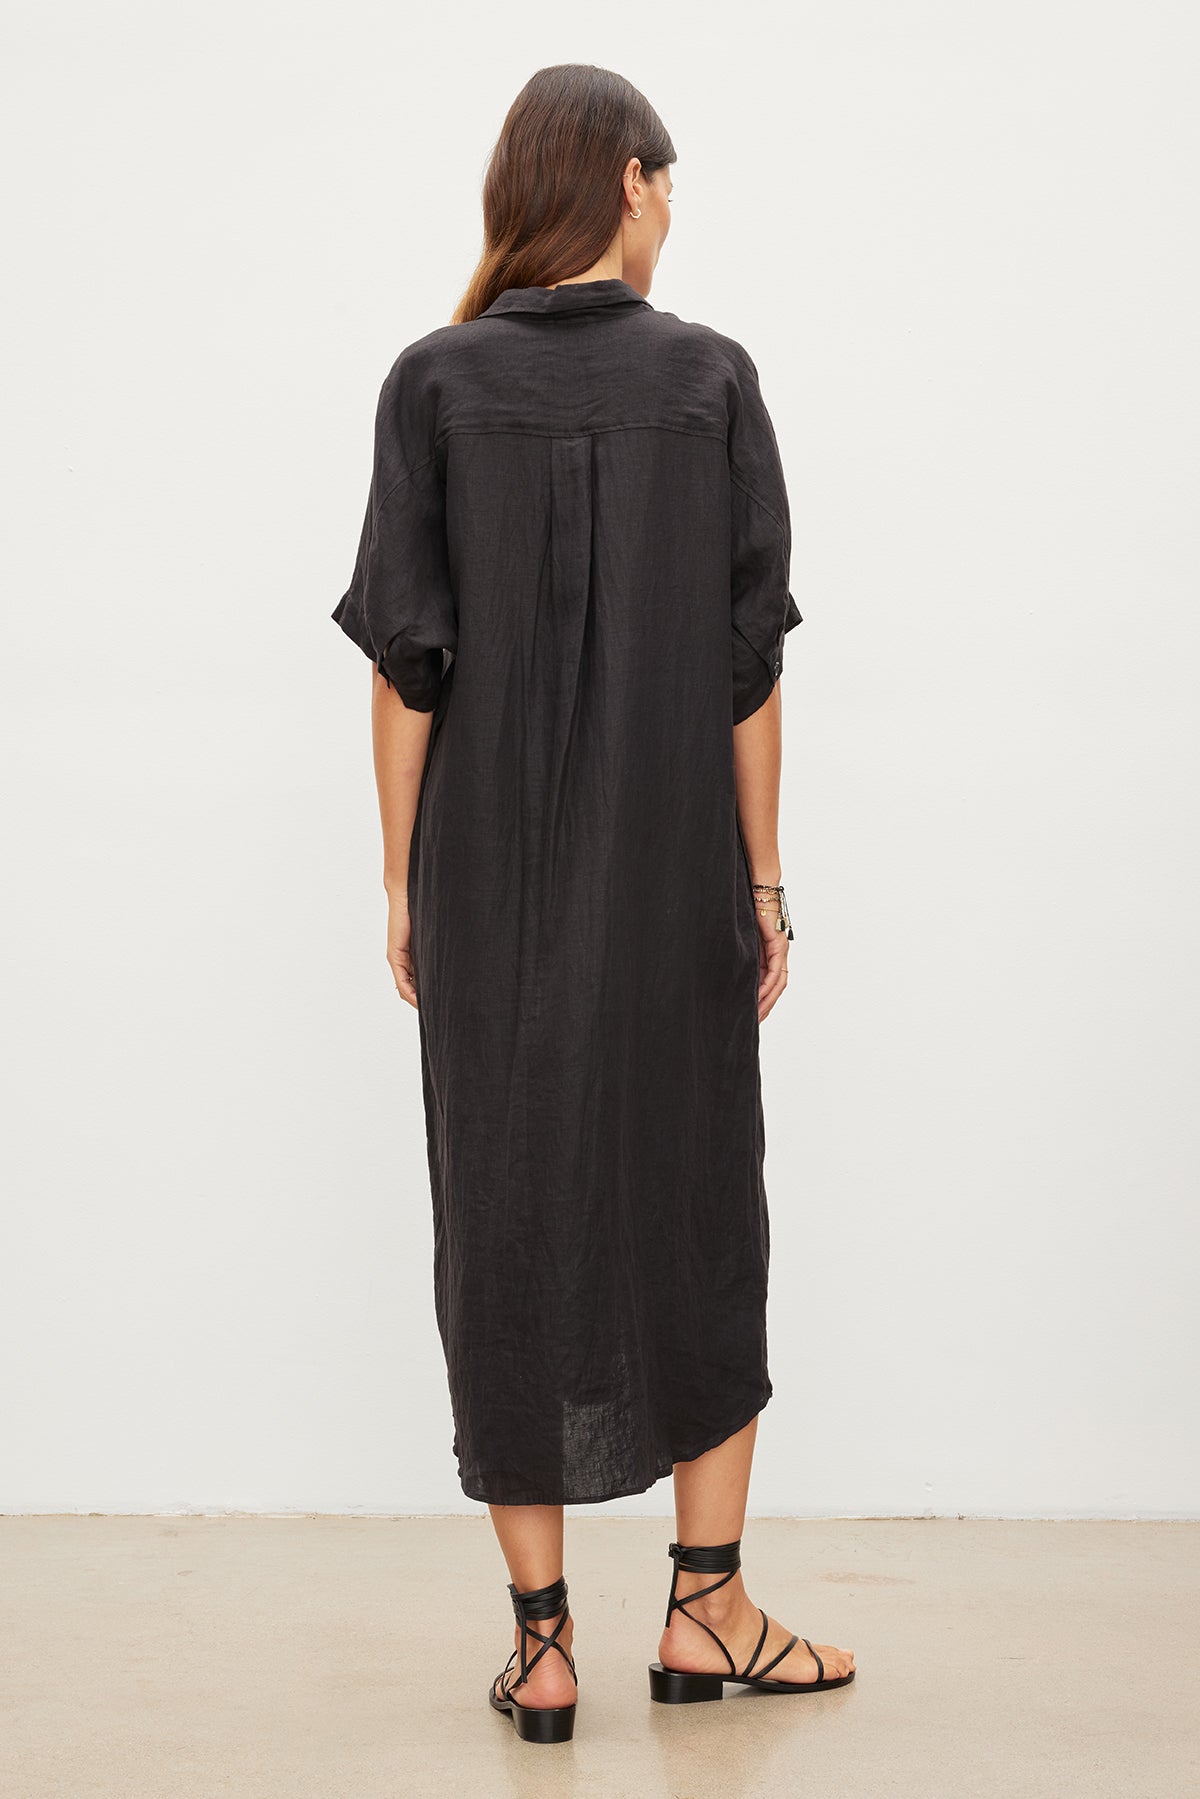 Rear view of a woman wearing a Velvet by Graham & Spencer SANDRA LINEN BUTTON-UP DRESS with short sleeves and sandals, standing against a white background.-35967717638337